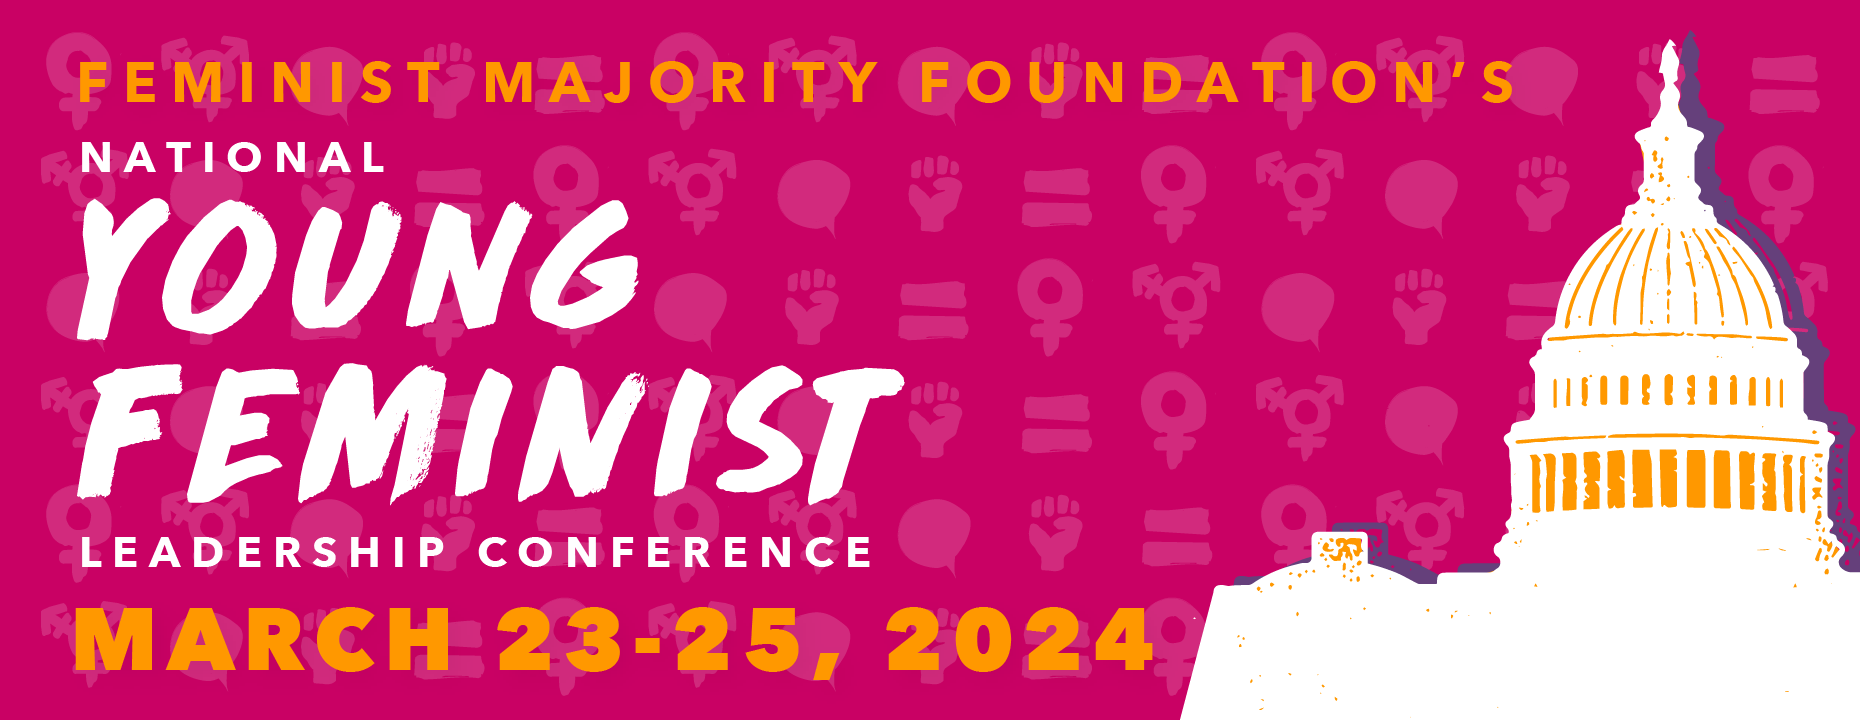 Feminist Majority Foundation's National Young Feminist Leadership Conference March 23-25, 2024